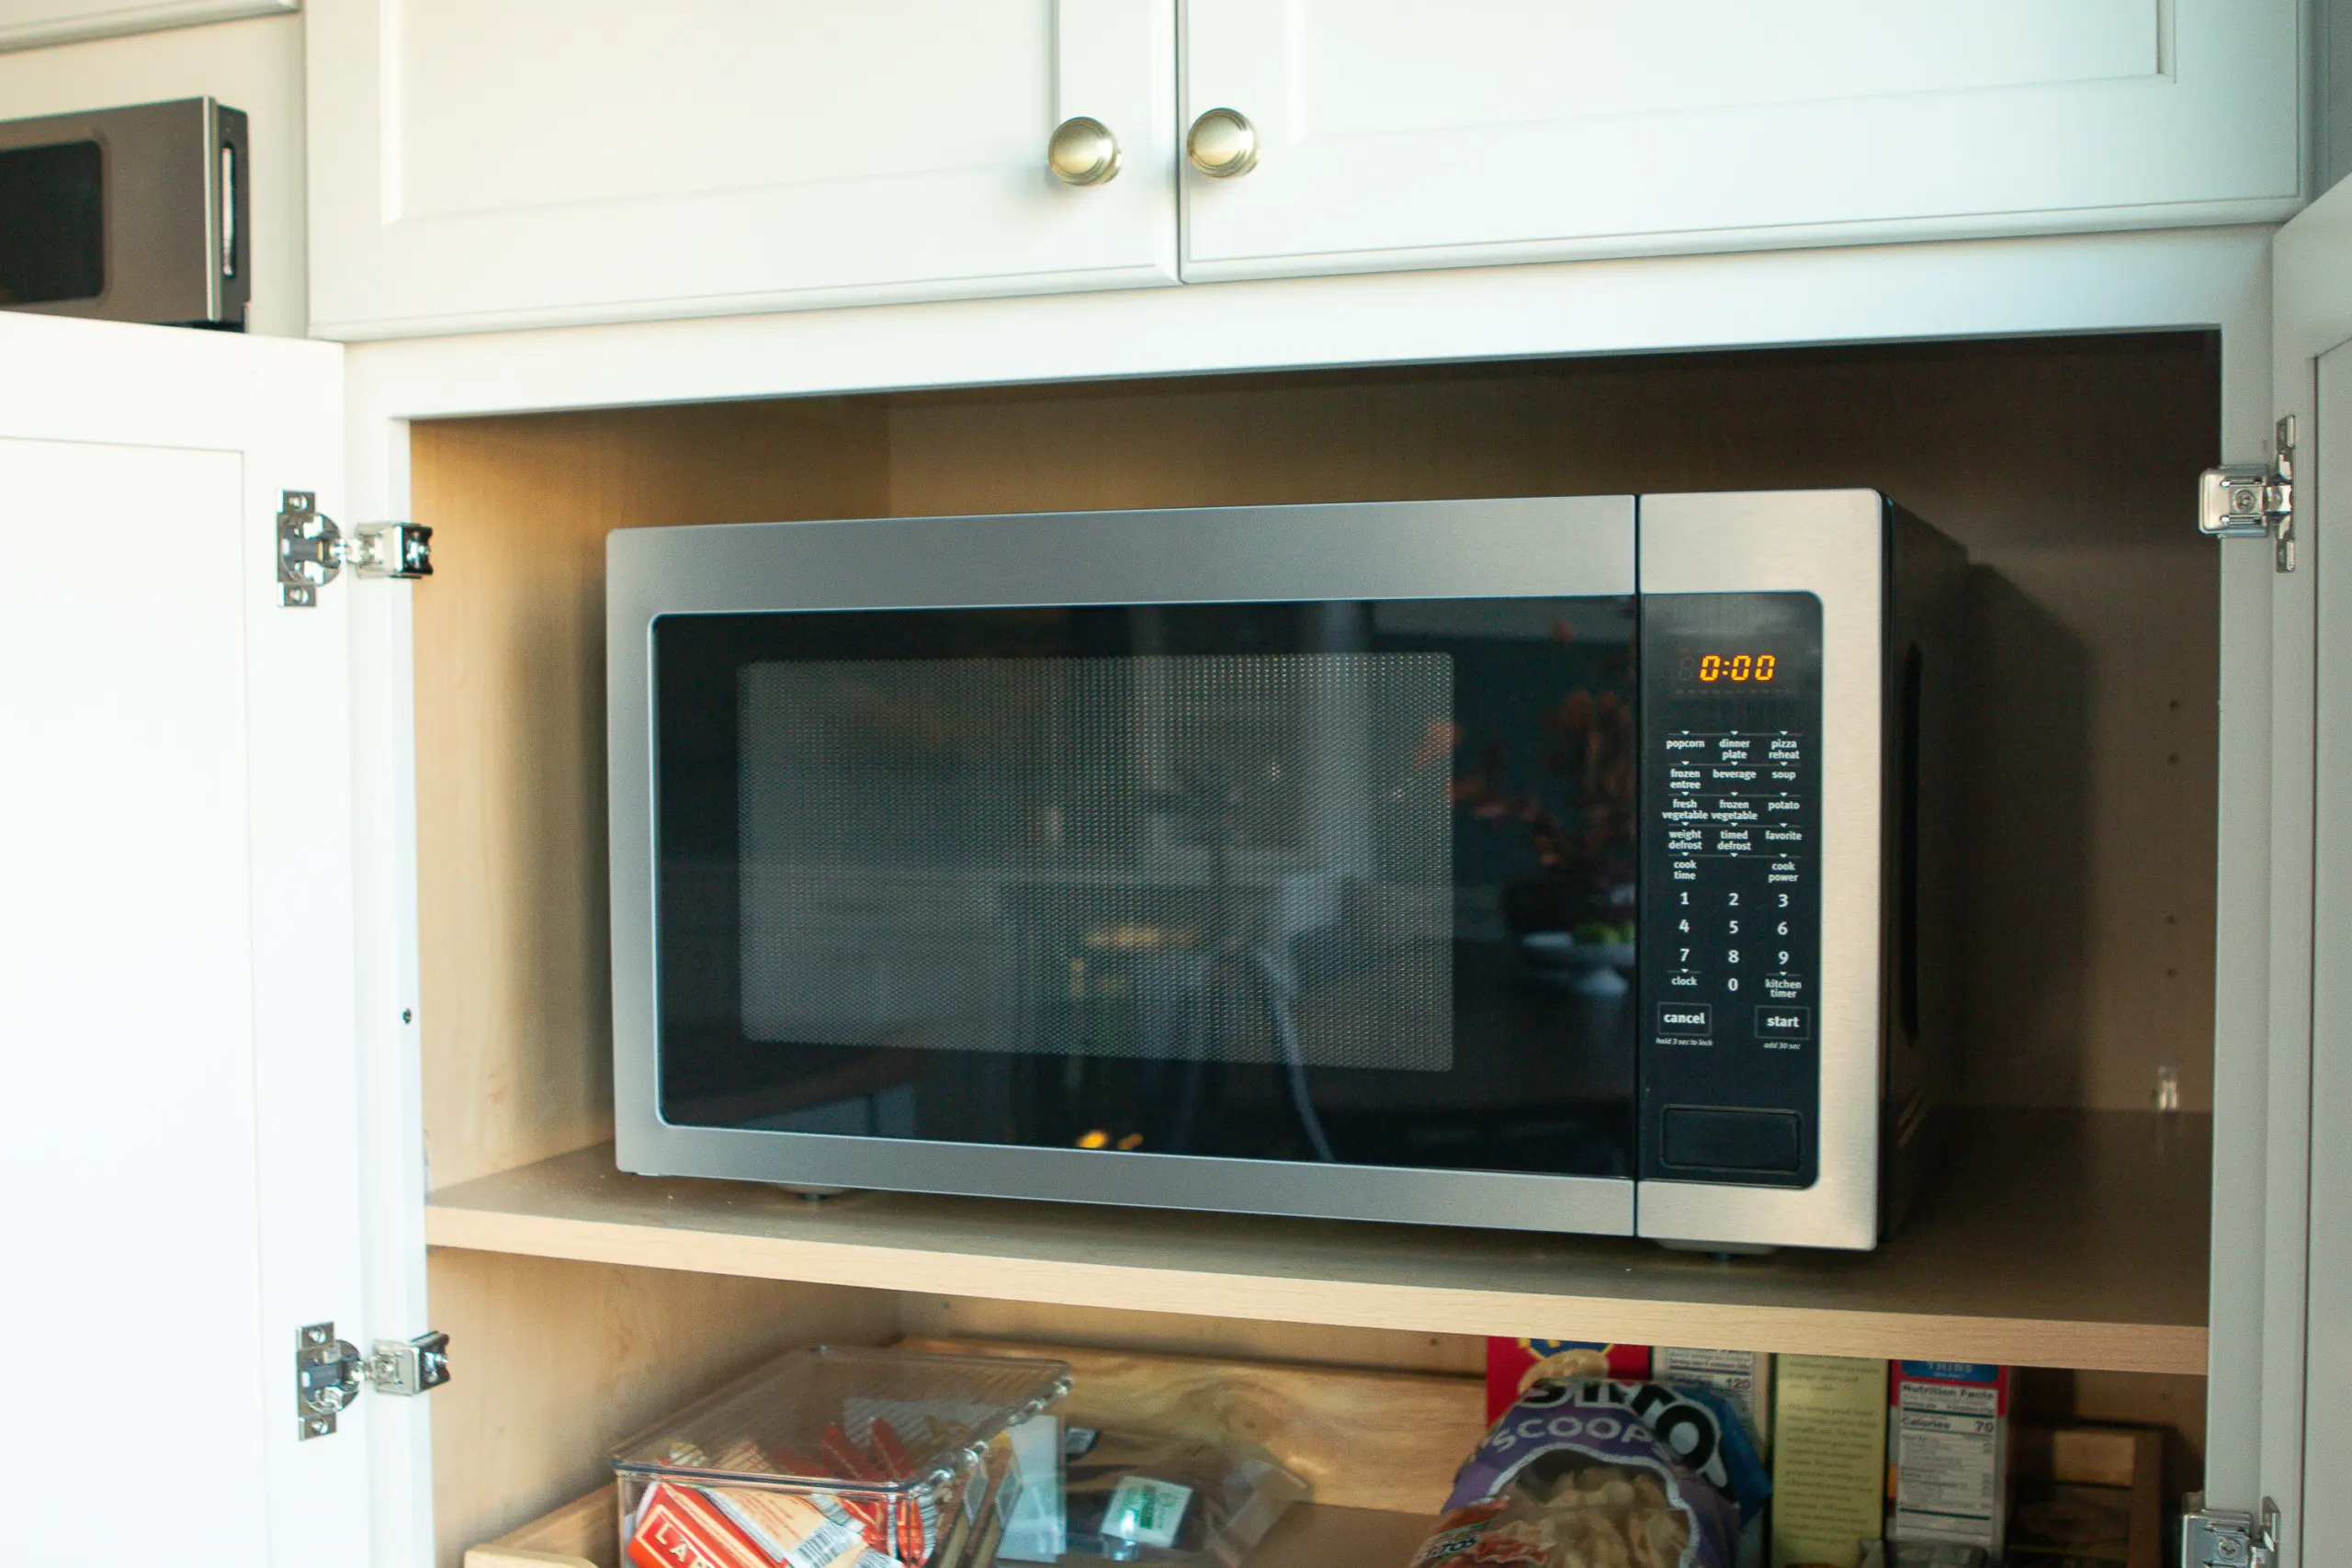 Fingerprint resistant stainless steel on our microwave